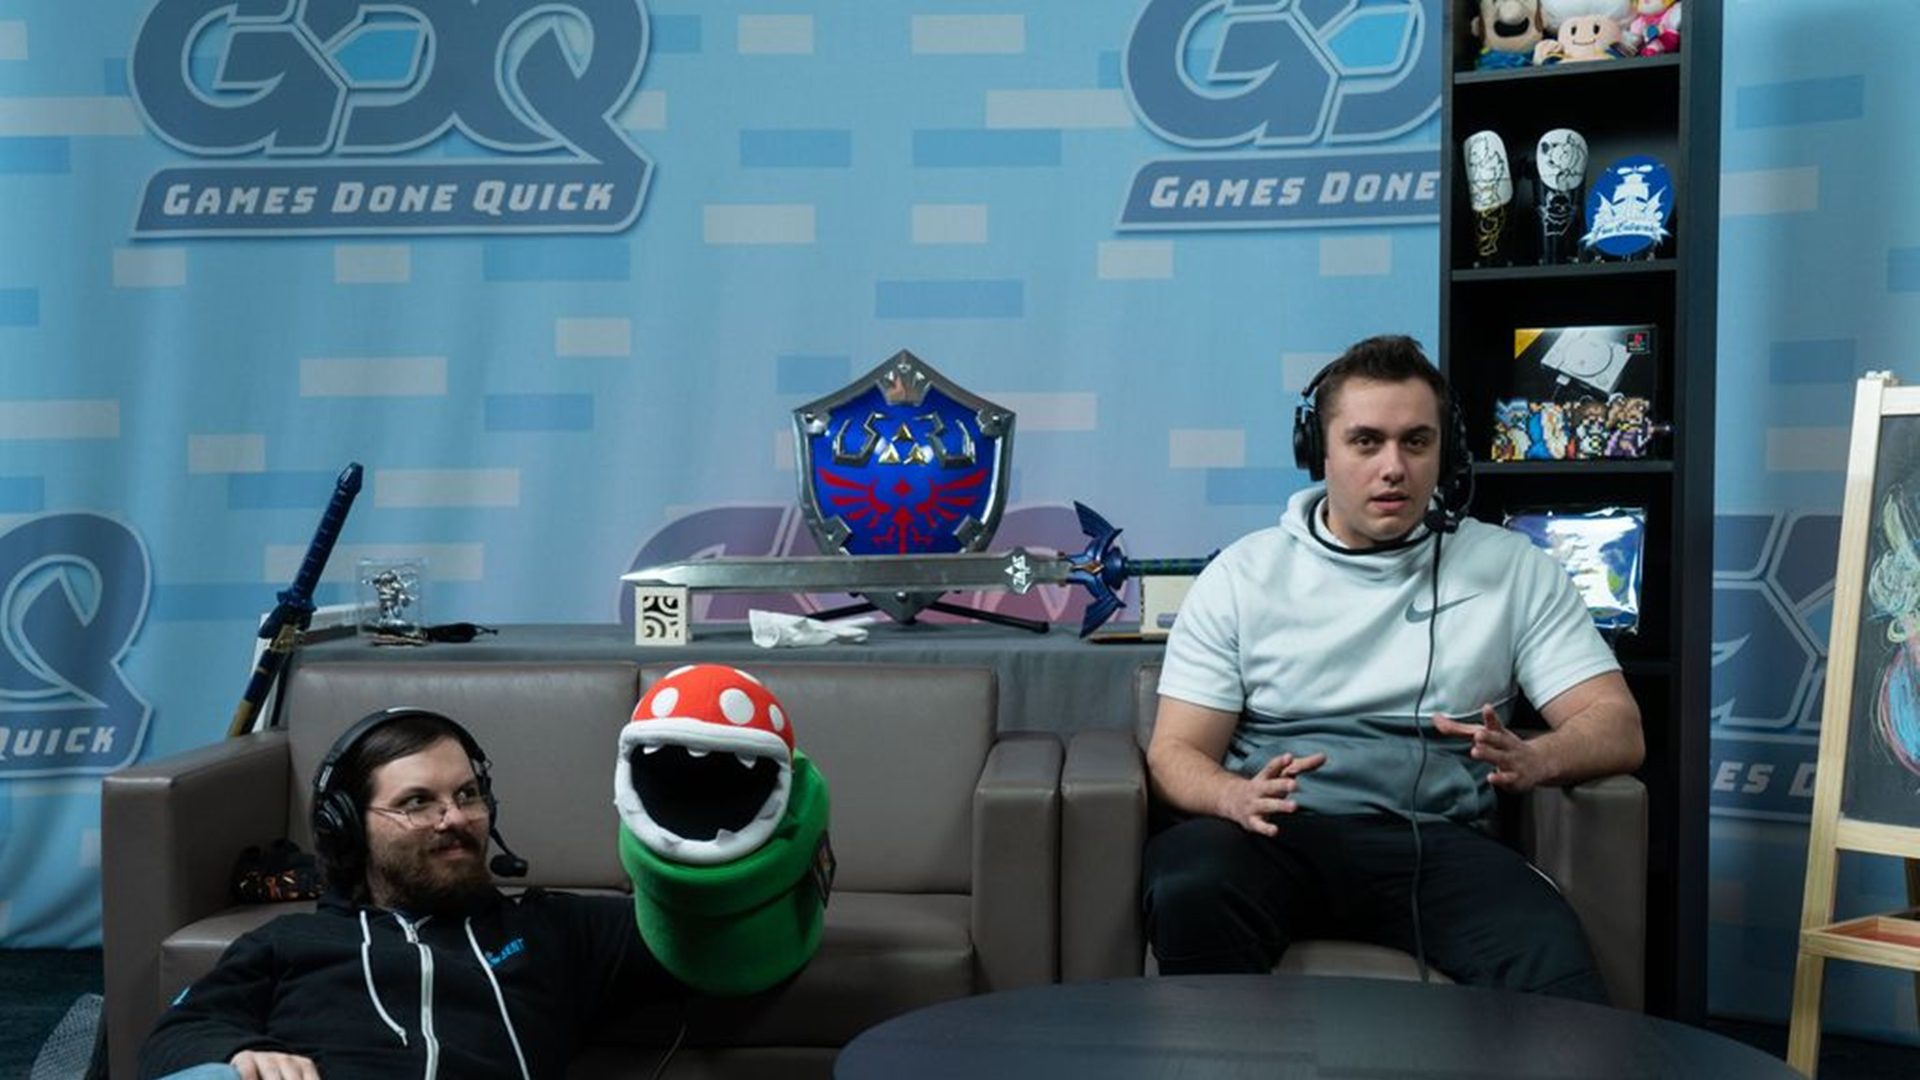 GDQ is the premier speedrunning showcase and typically holds two major events per year.